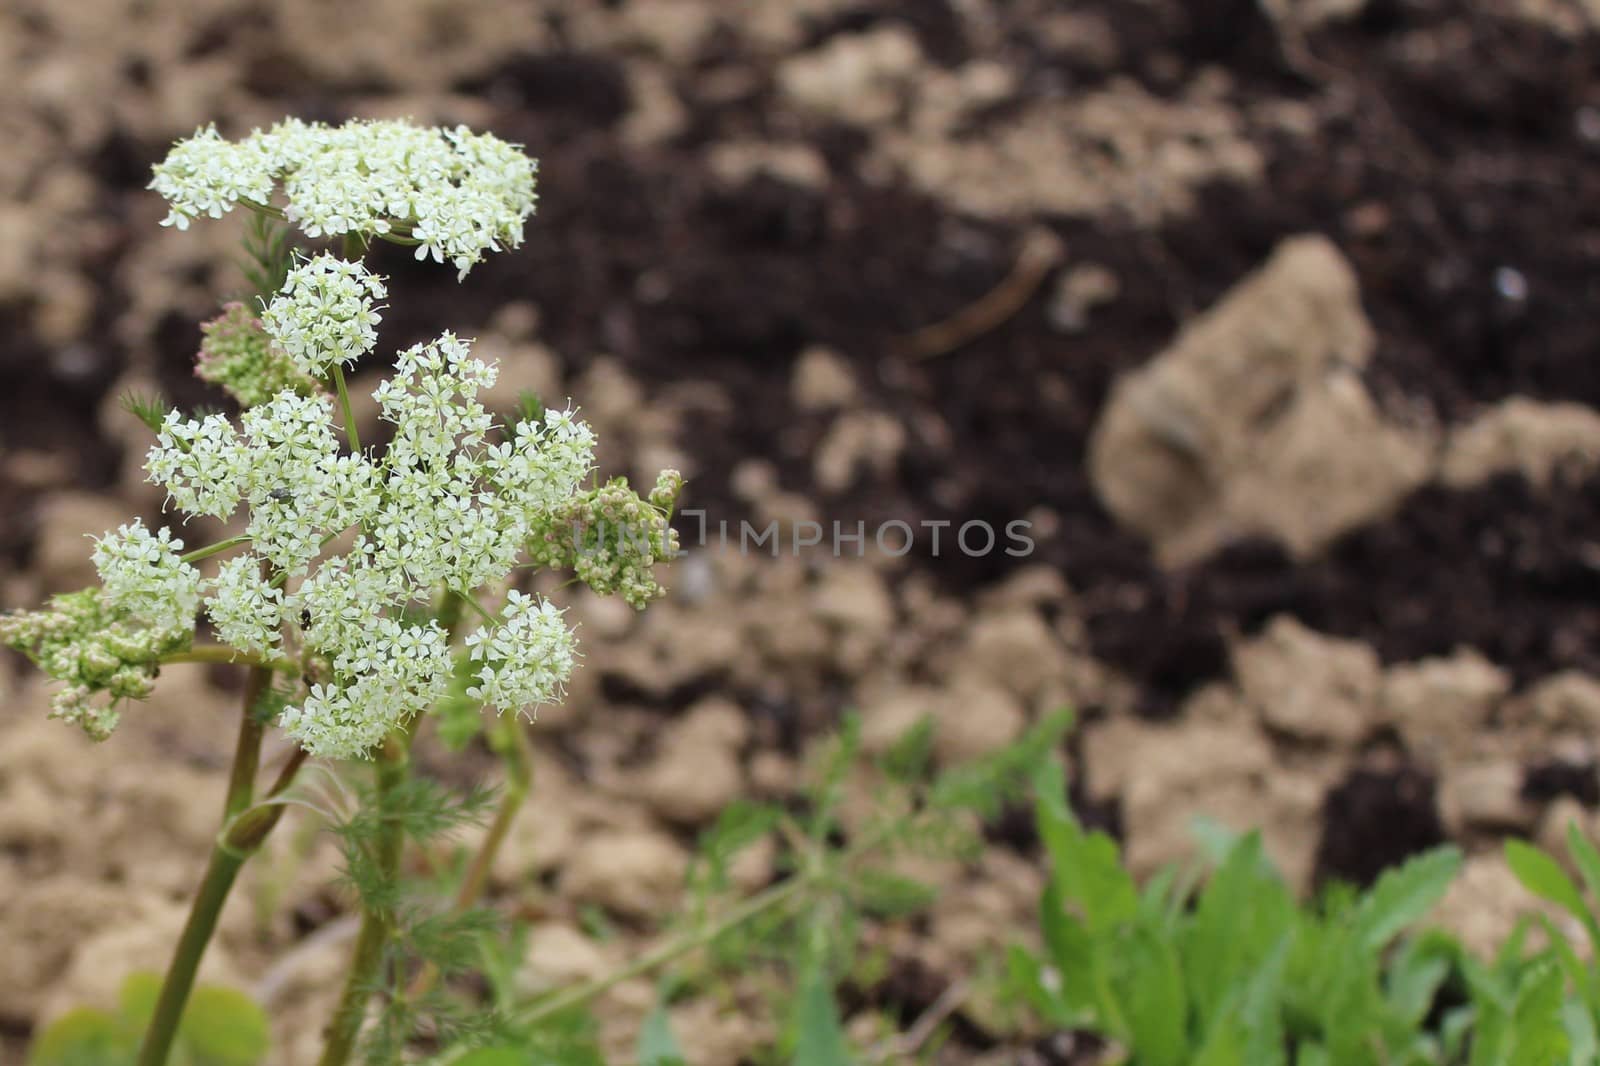 The picture shows sweet cicely in the garden